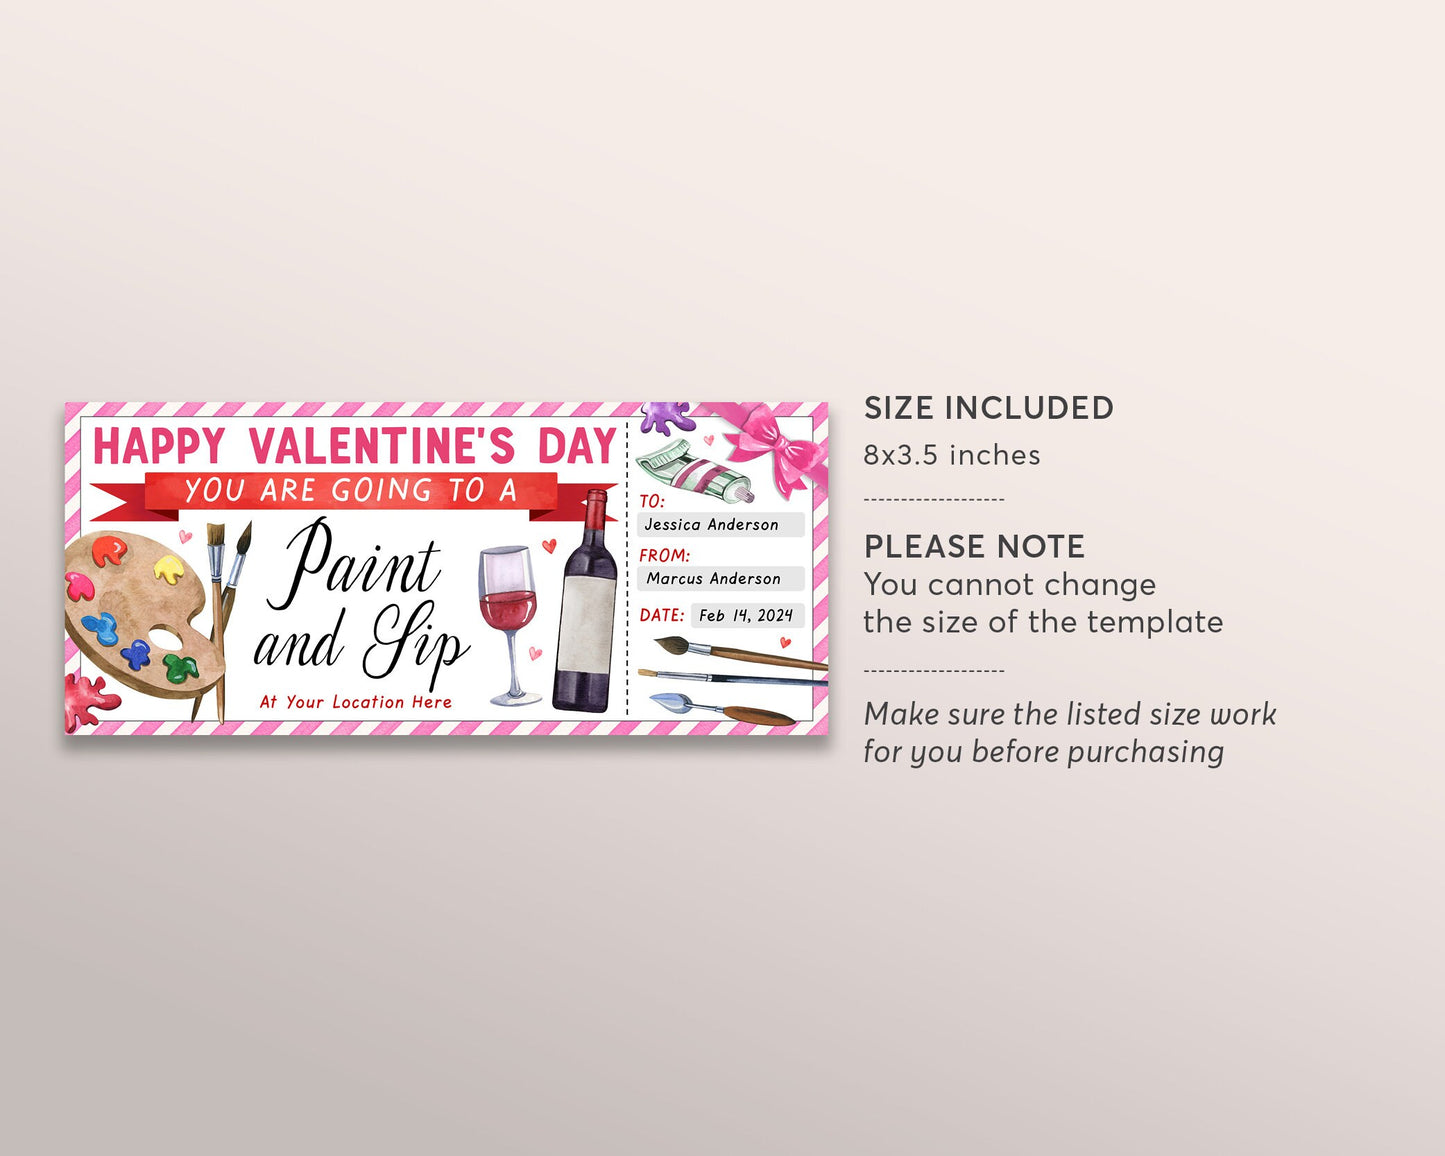 Valentines Day Paint And Sip Class Gift Certificate Ticket Editable Template, Painting Experience Art Lessons Couples Date Night Voucher